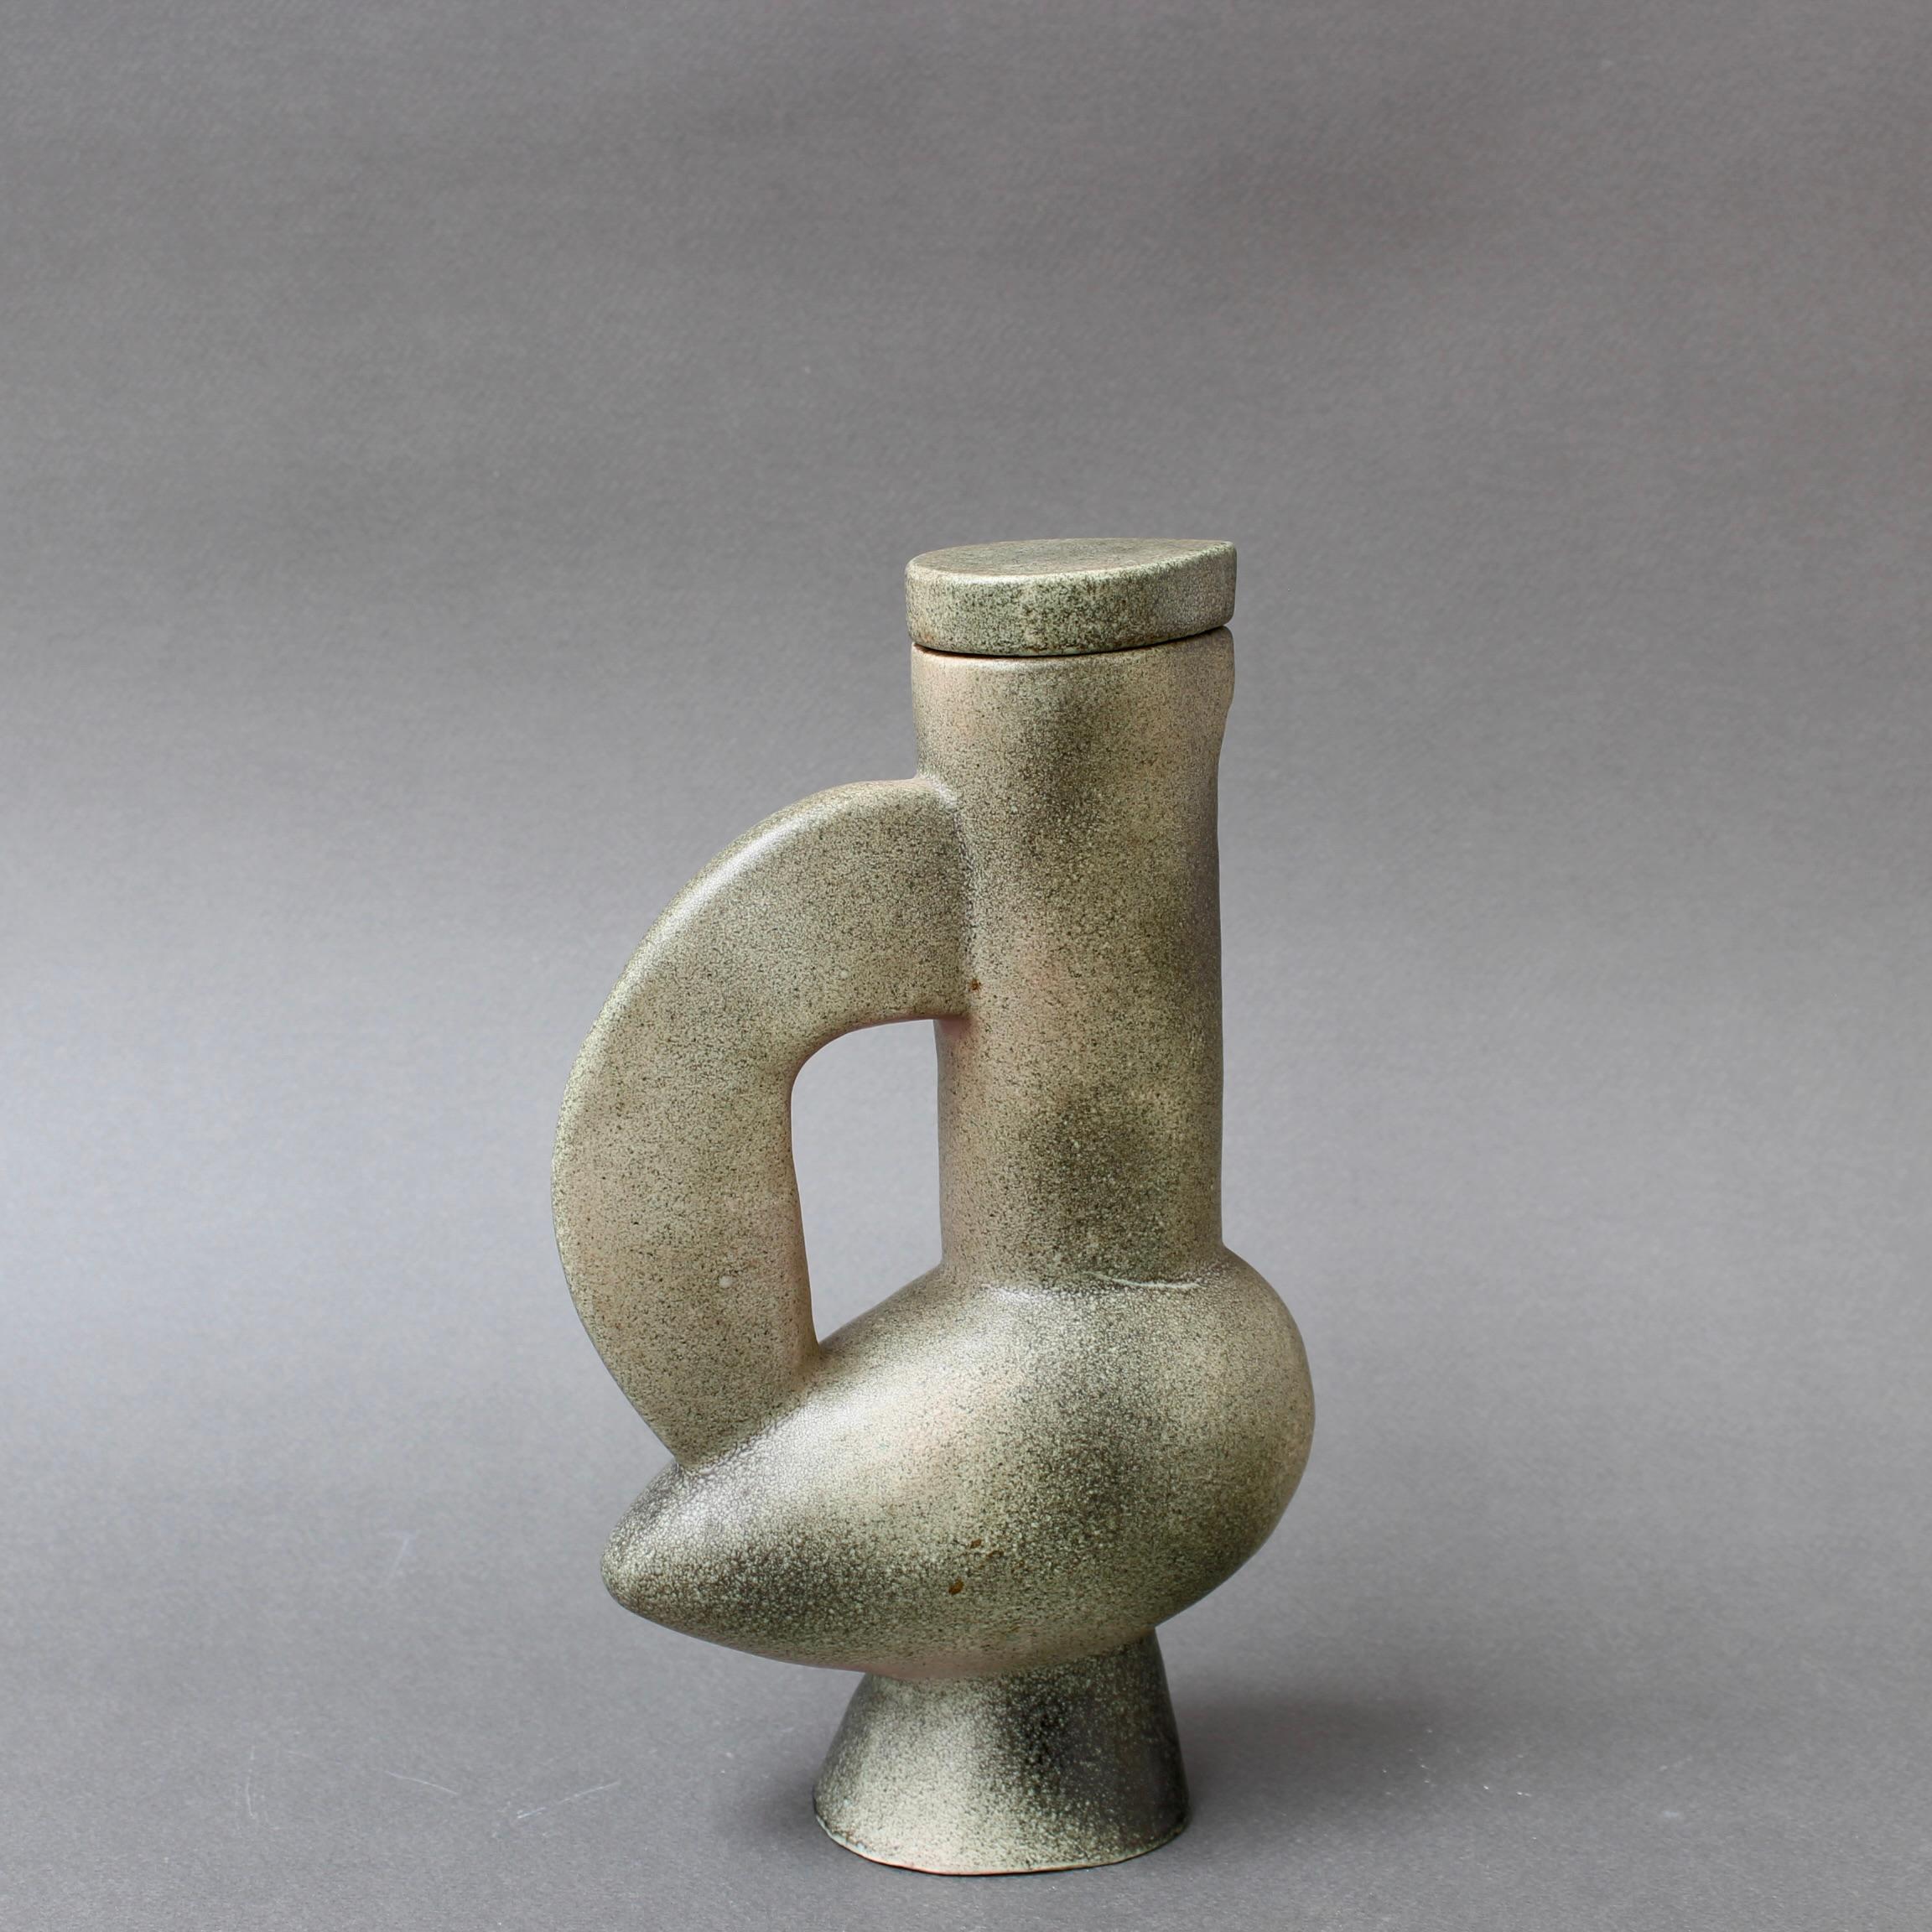 Vintage French Zoomorphic Ceramic Pitcher with Lid by Jacques Blin (1953) In Good Condition For Sale In London, GB